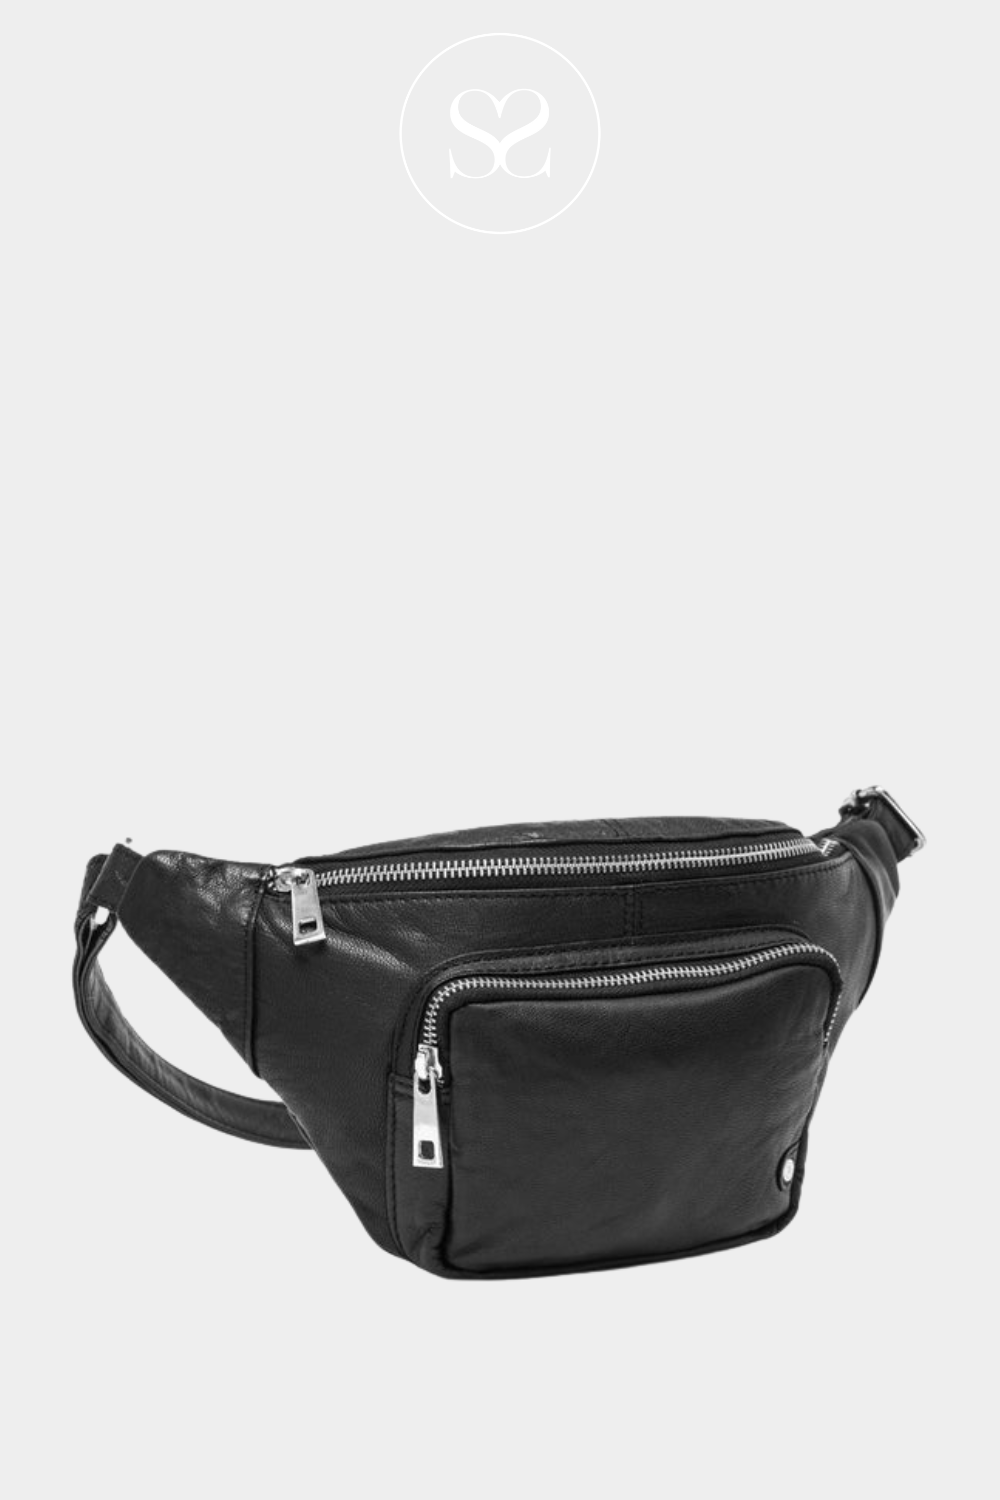 DEPECHE 13396 LEATHER BLACK BUMBAG WITH SILVER HARDWARE AND SMALL FRONT POCKET